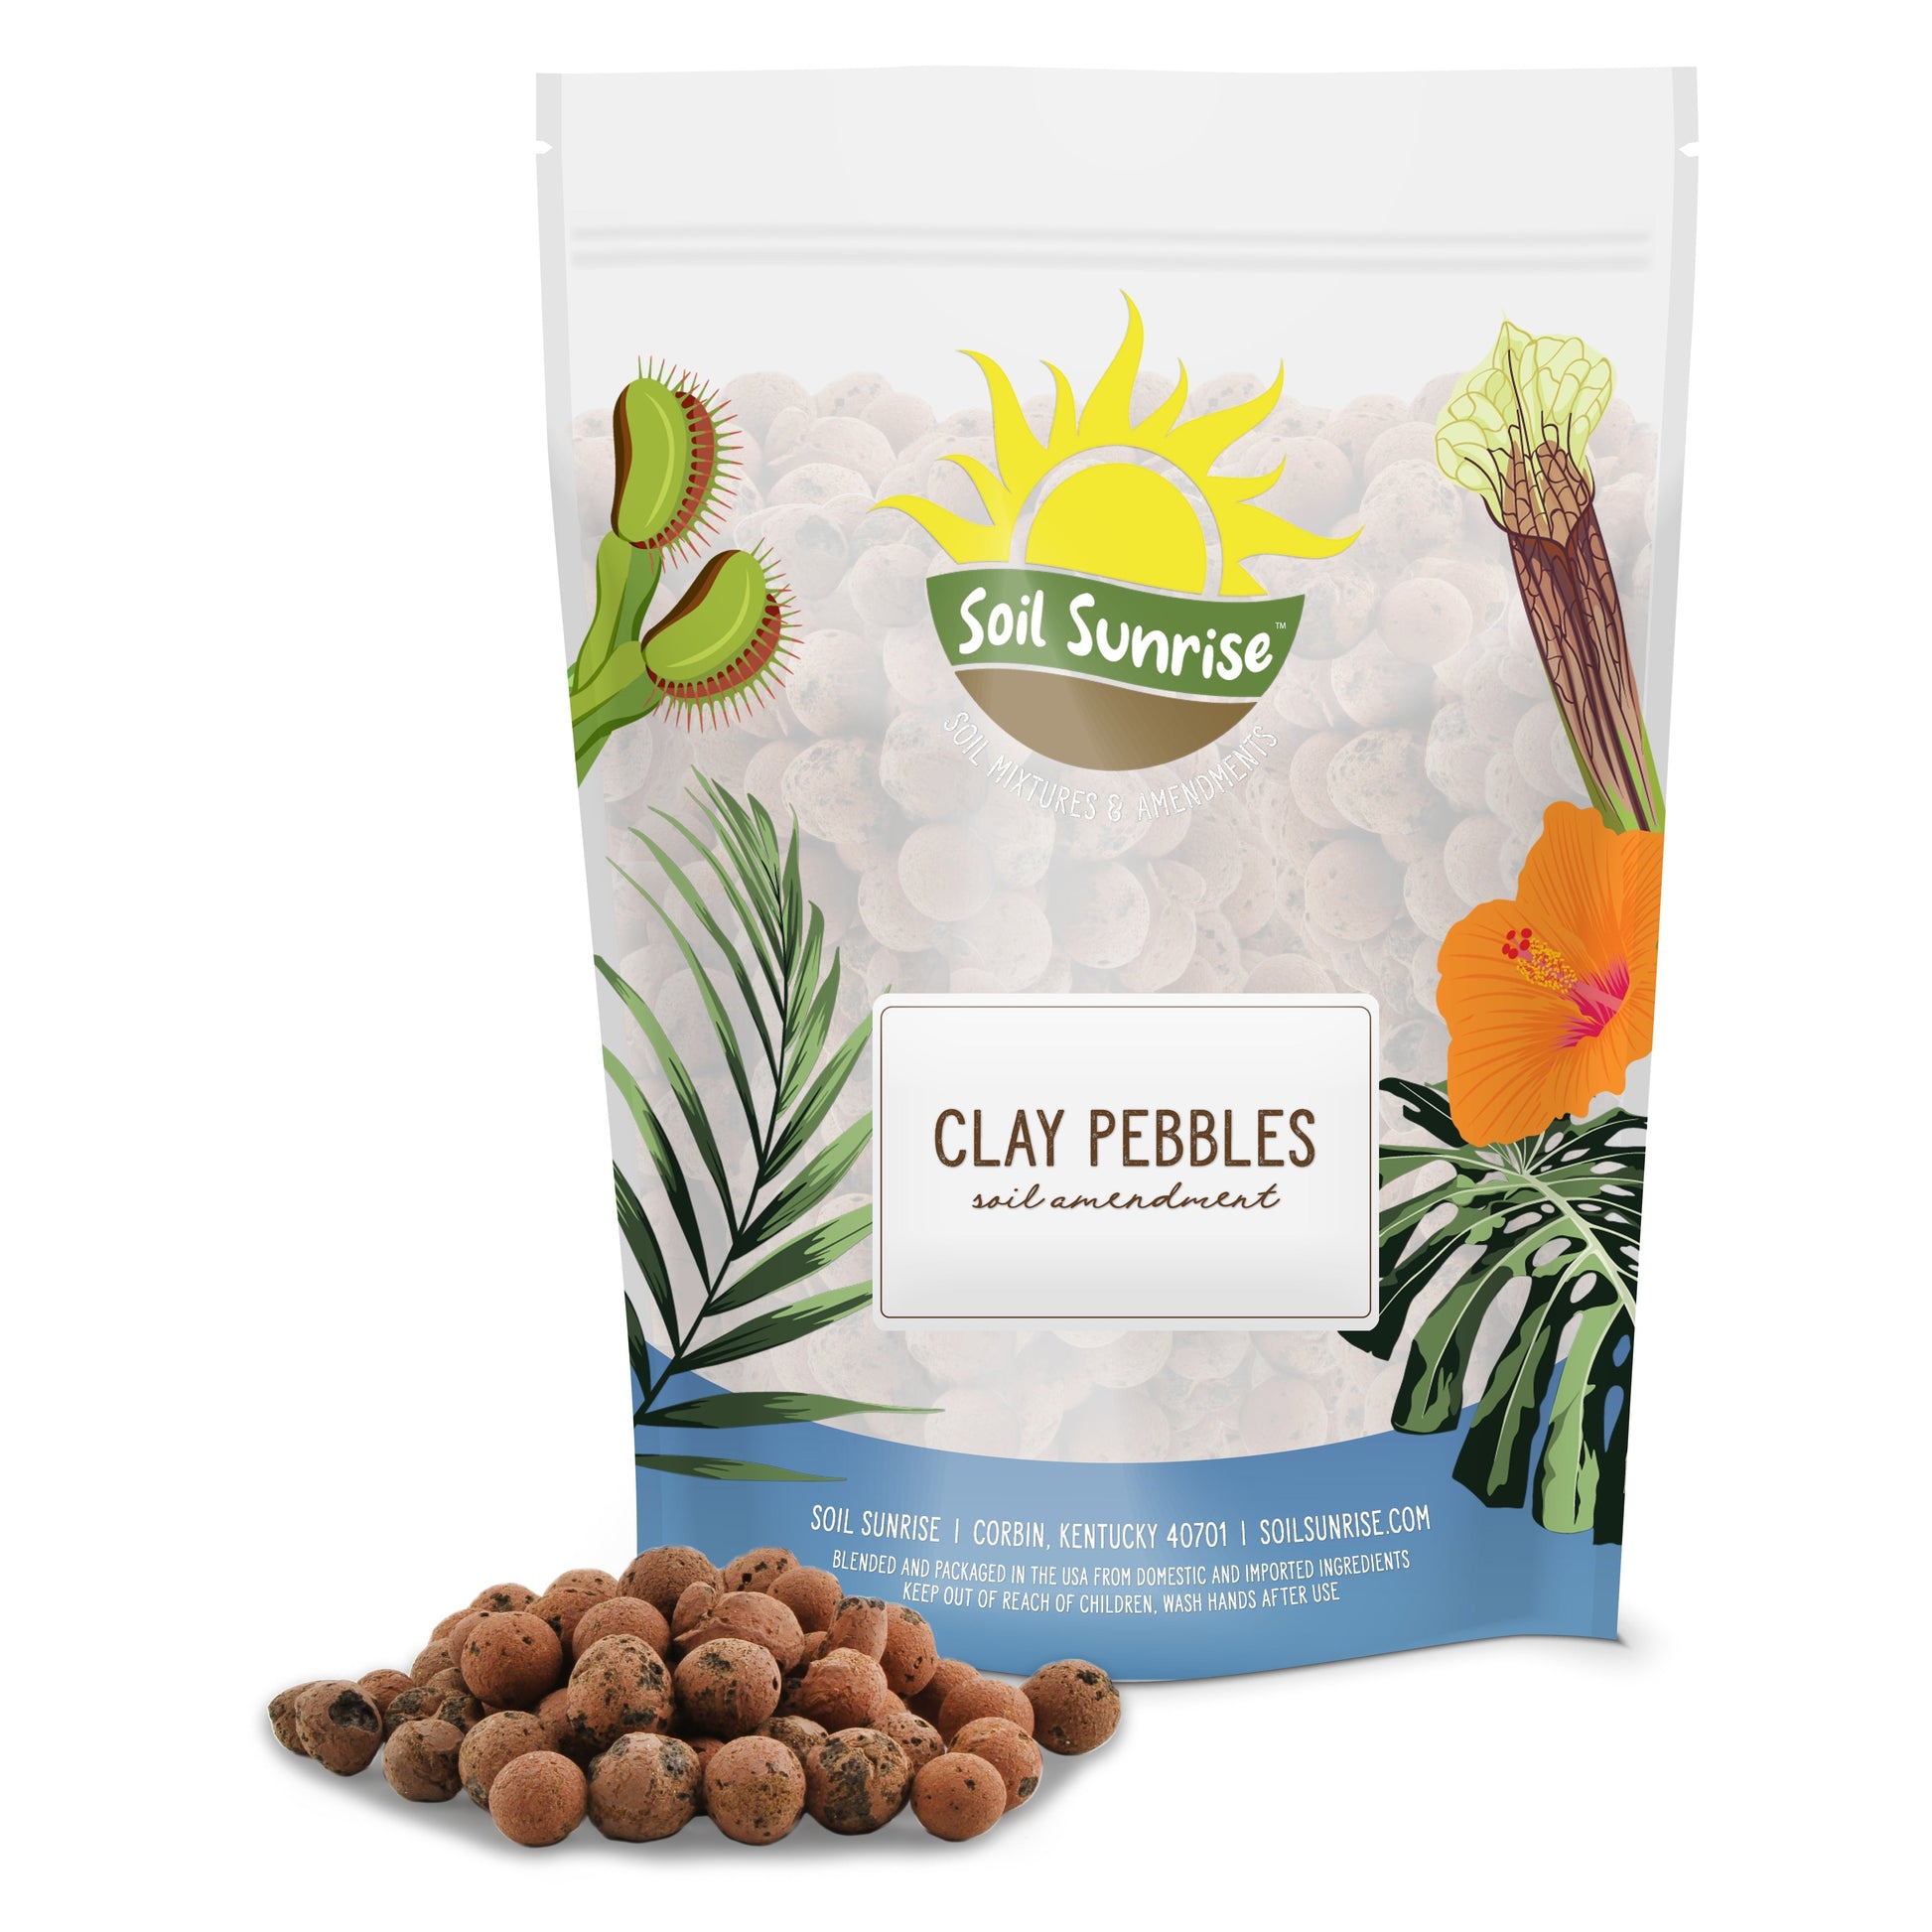 Expanded Hydroponic Clay Pebbles